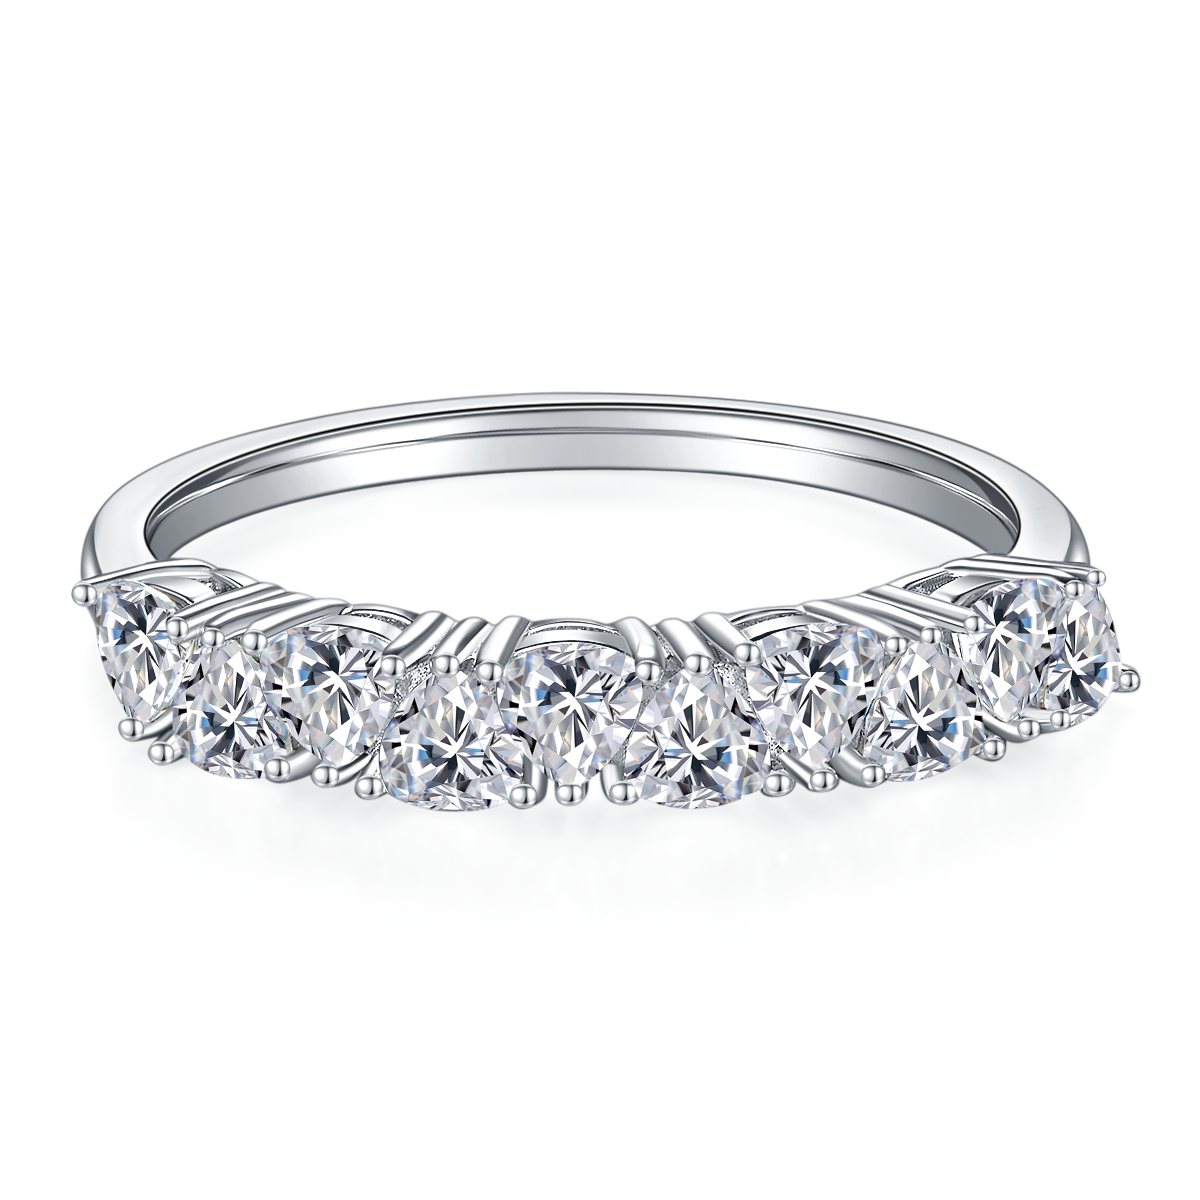 Trillion Cut wedding ring, wedding band, promise ring, gift for her, girl, girlfriend, for women, mother, mom, mum, for wife, S925 Moissanite Diamond ring, Valentine’s Day, Mother’s Day, Birthday, anniversary